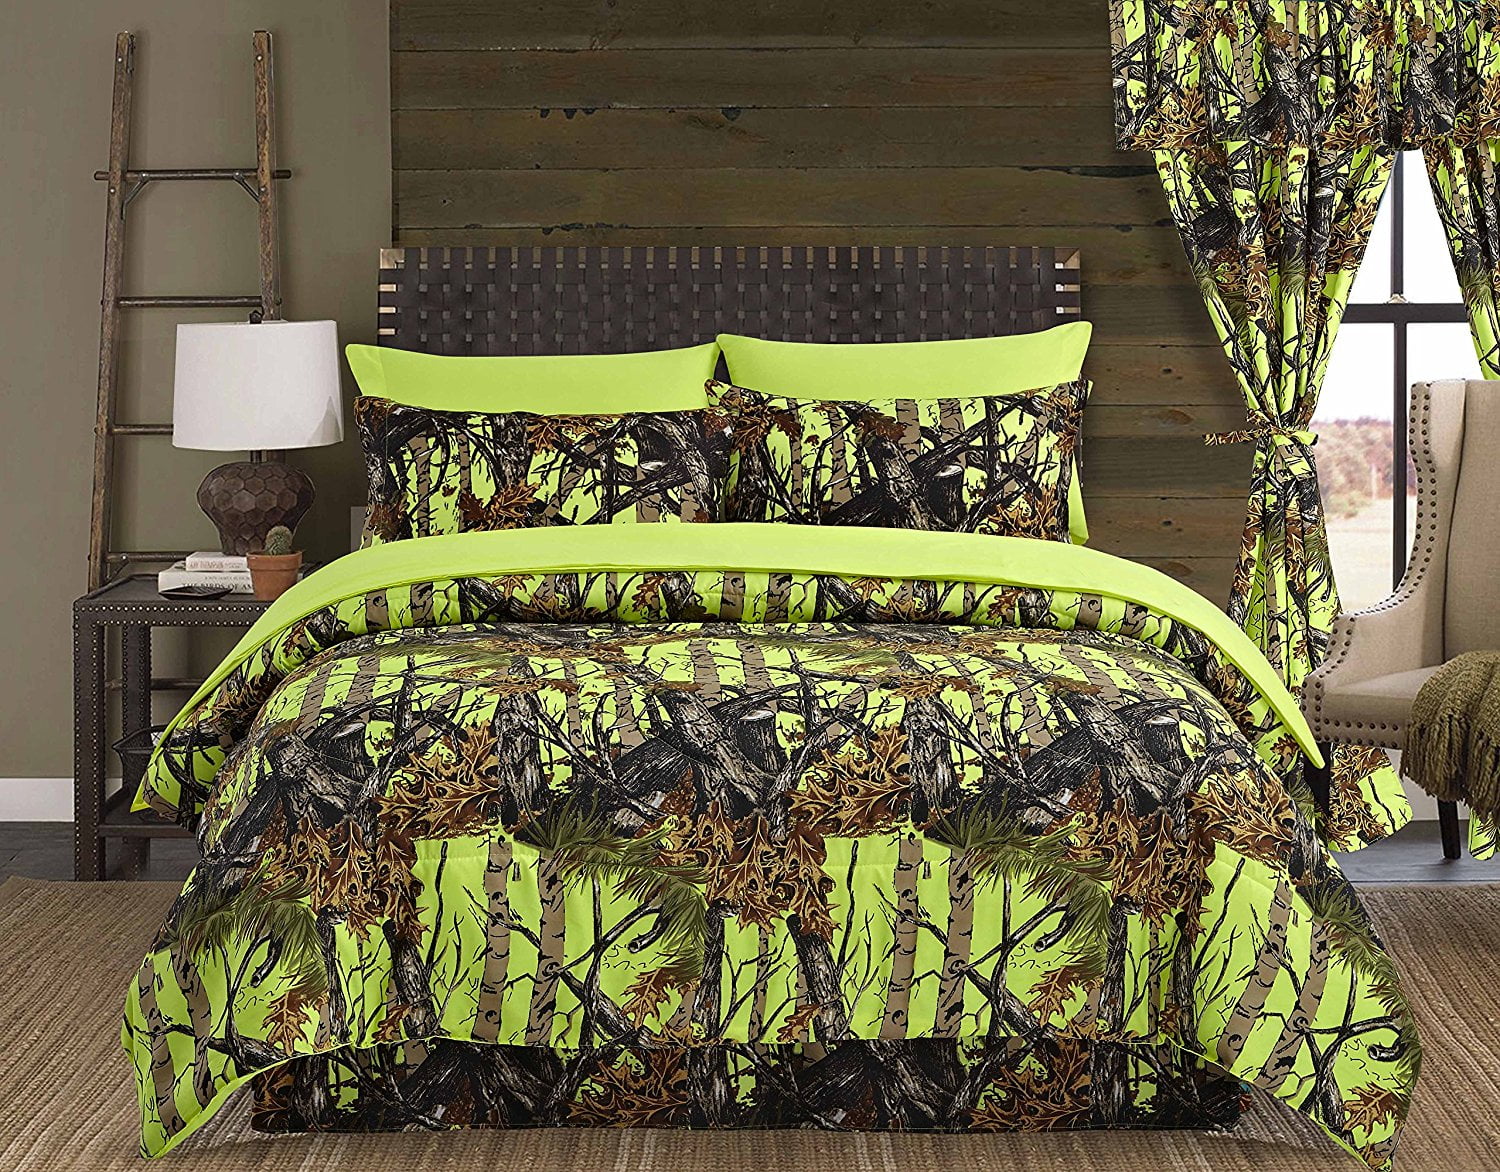 7 PC REGAL COMFORT LIME GREEN CAMO COMFORTER SHEETS PILLOW CASES CAMOUFLAGE FULL 